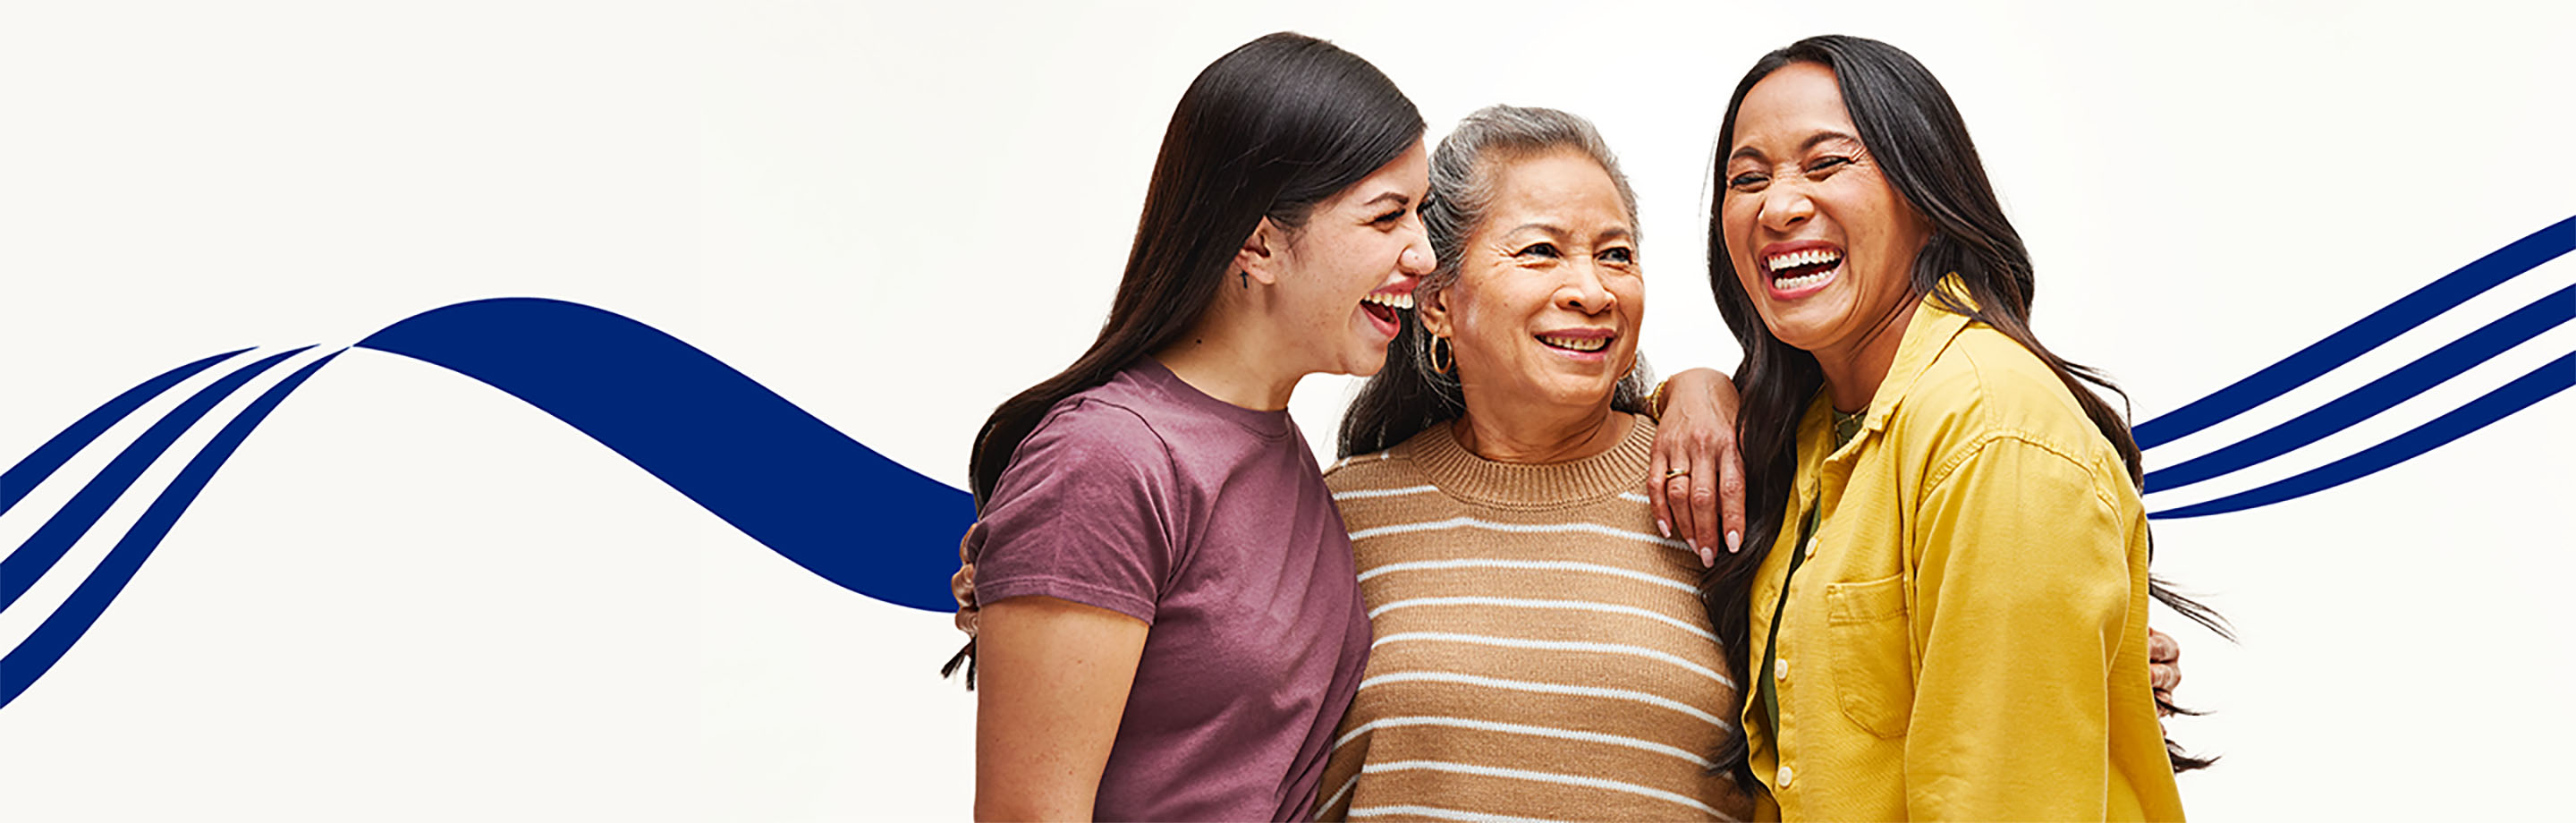 Three women hear each other laugh together - helping illustrate the UnitedHealthcare commitment to meeting patients' hearing health care needs